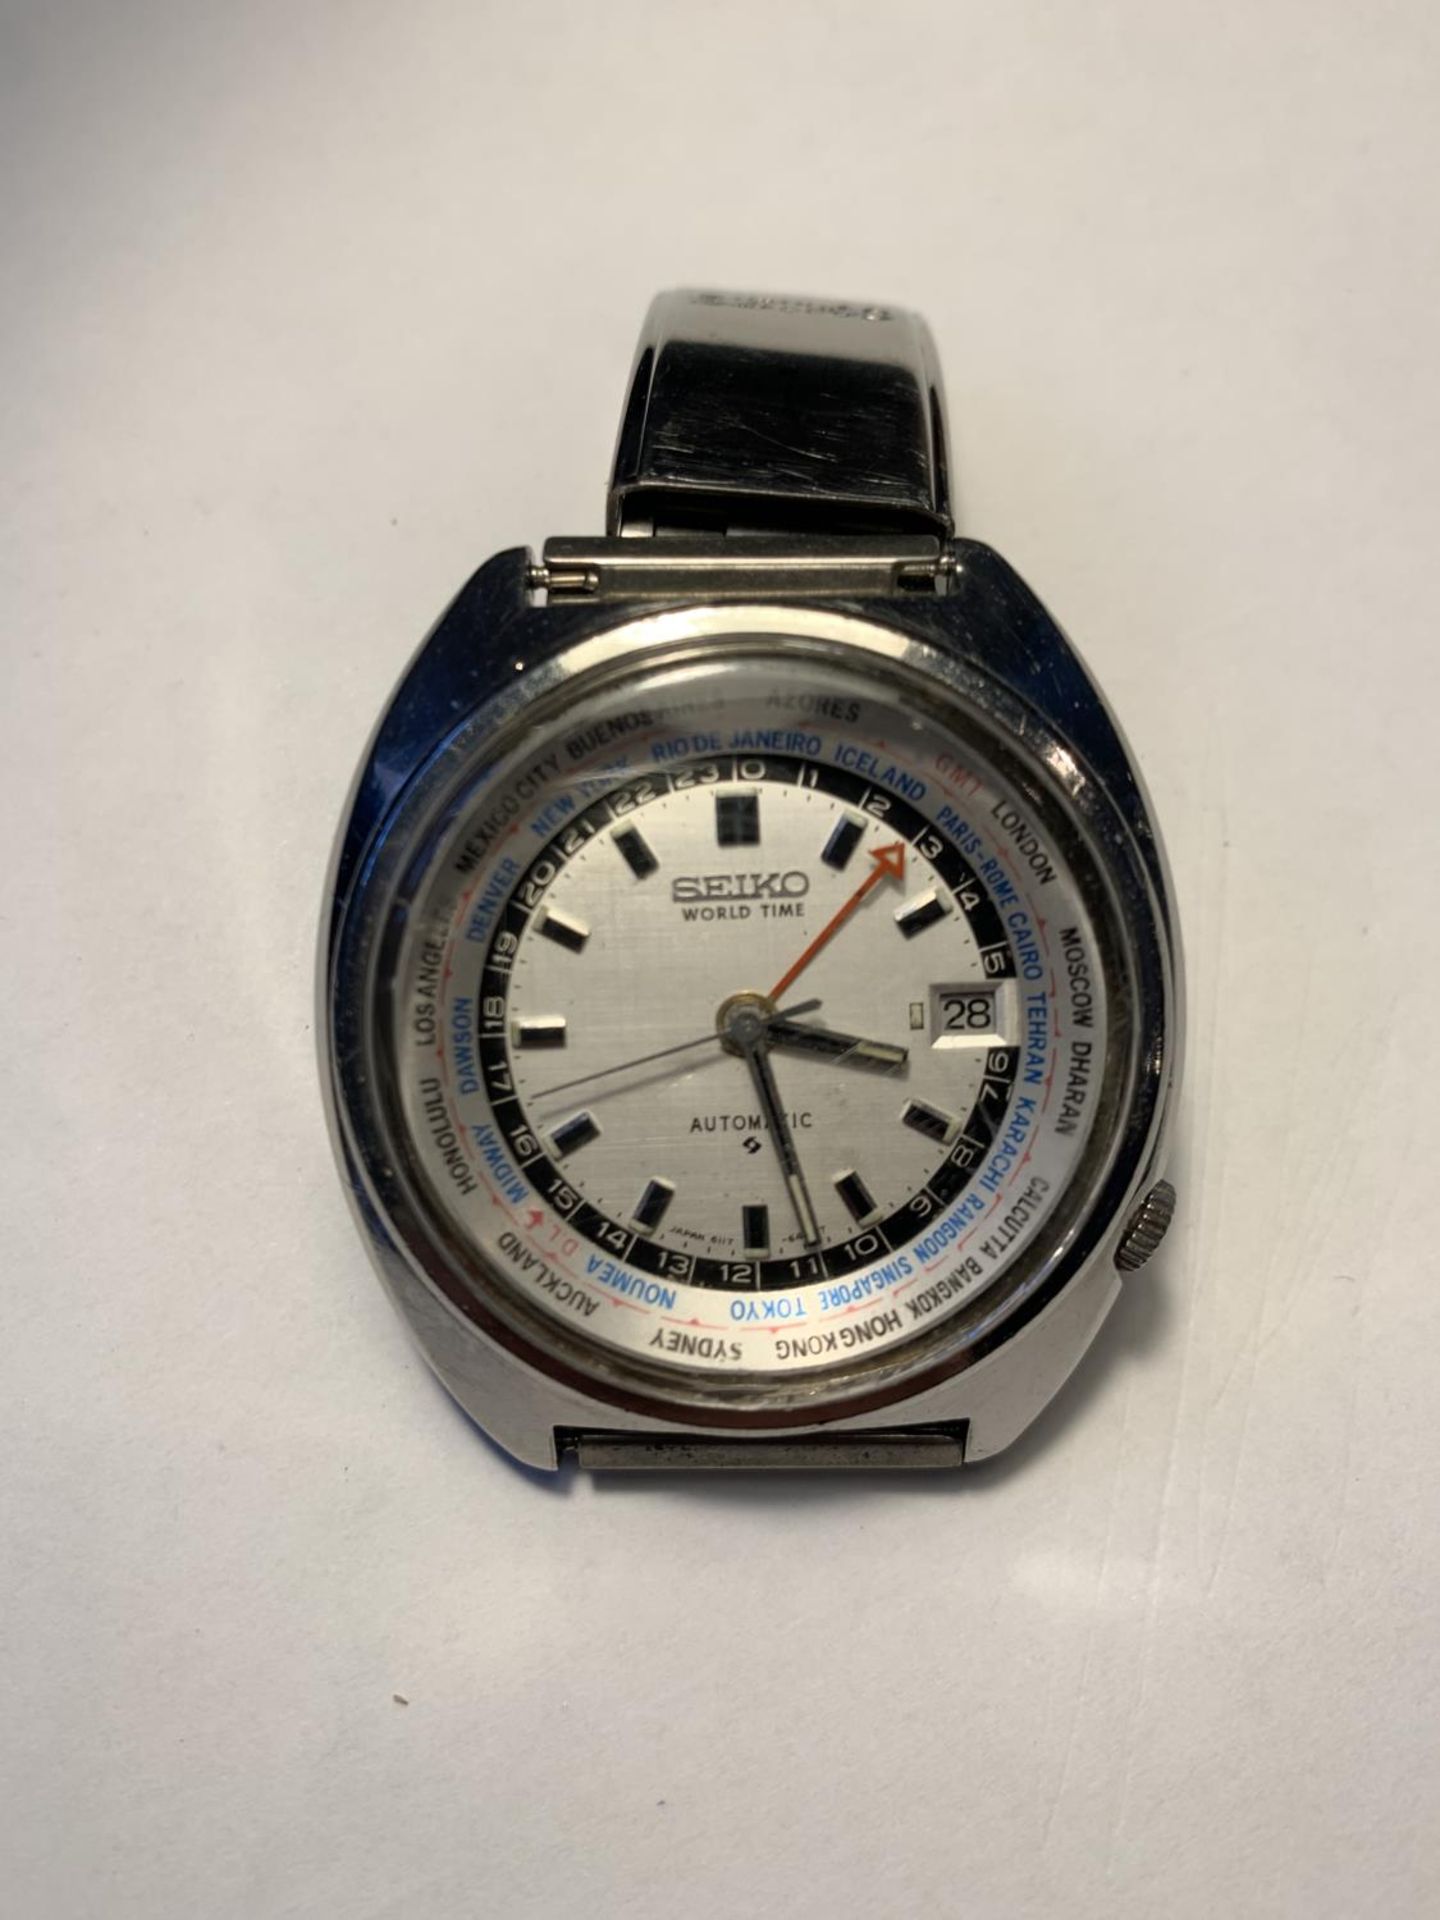 A 1970'S SEIKO WORLD TIME AUTOMATIC WRIST WATCH SEEN WORKING BUT NO WARRANTY - Image 2 of 4